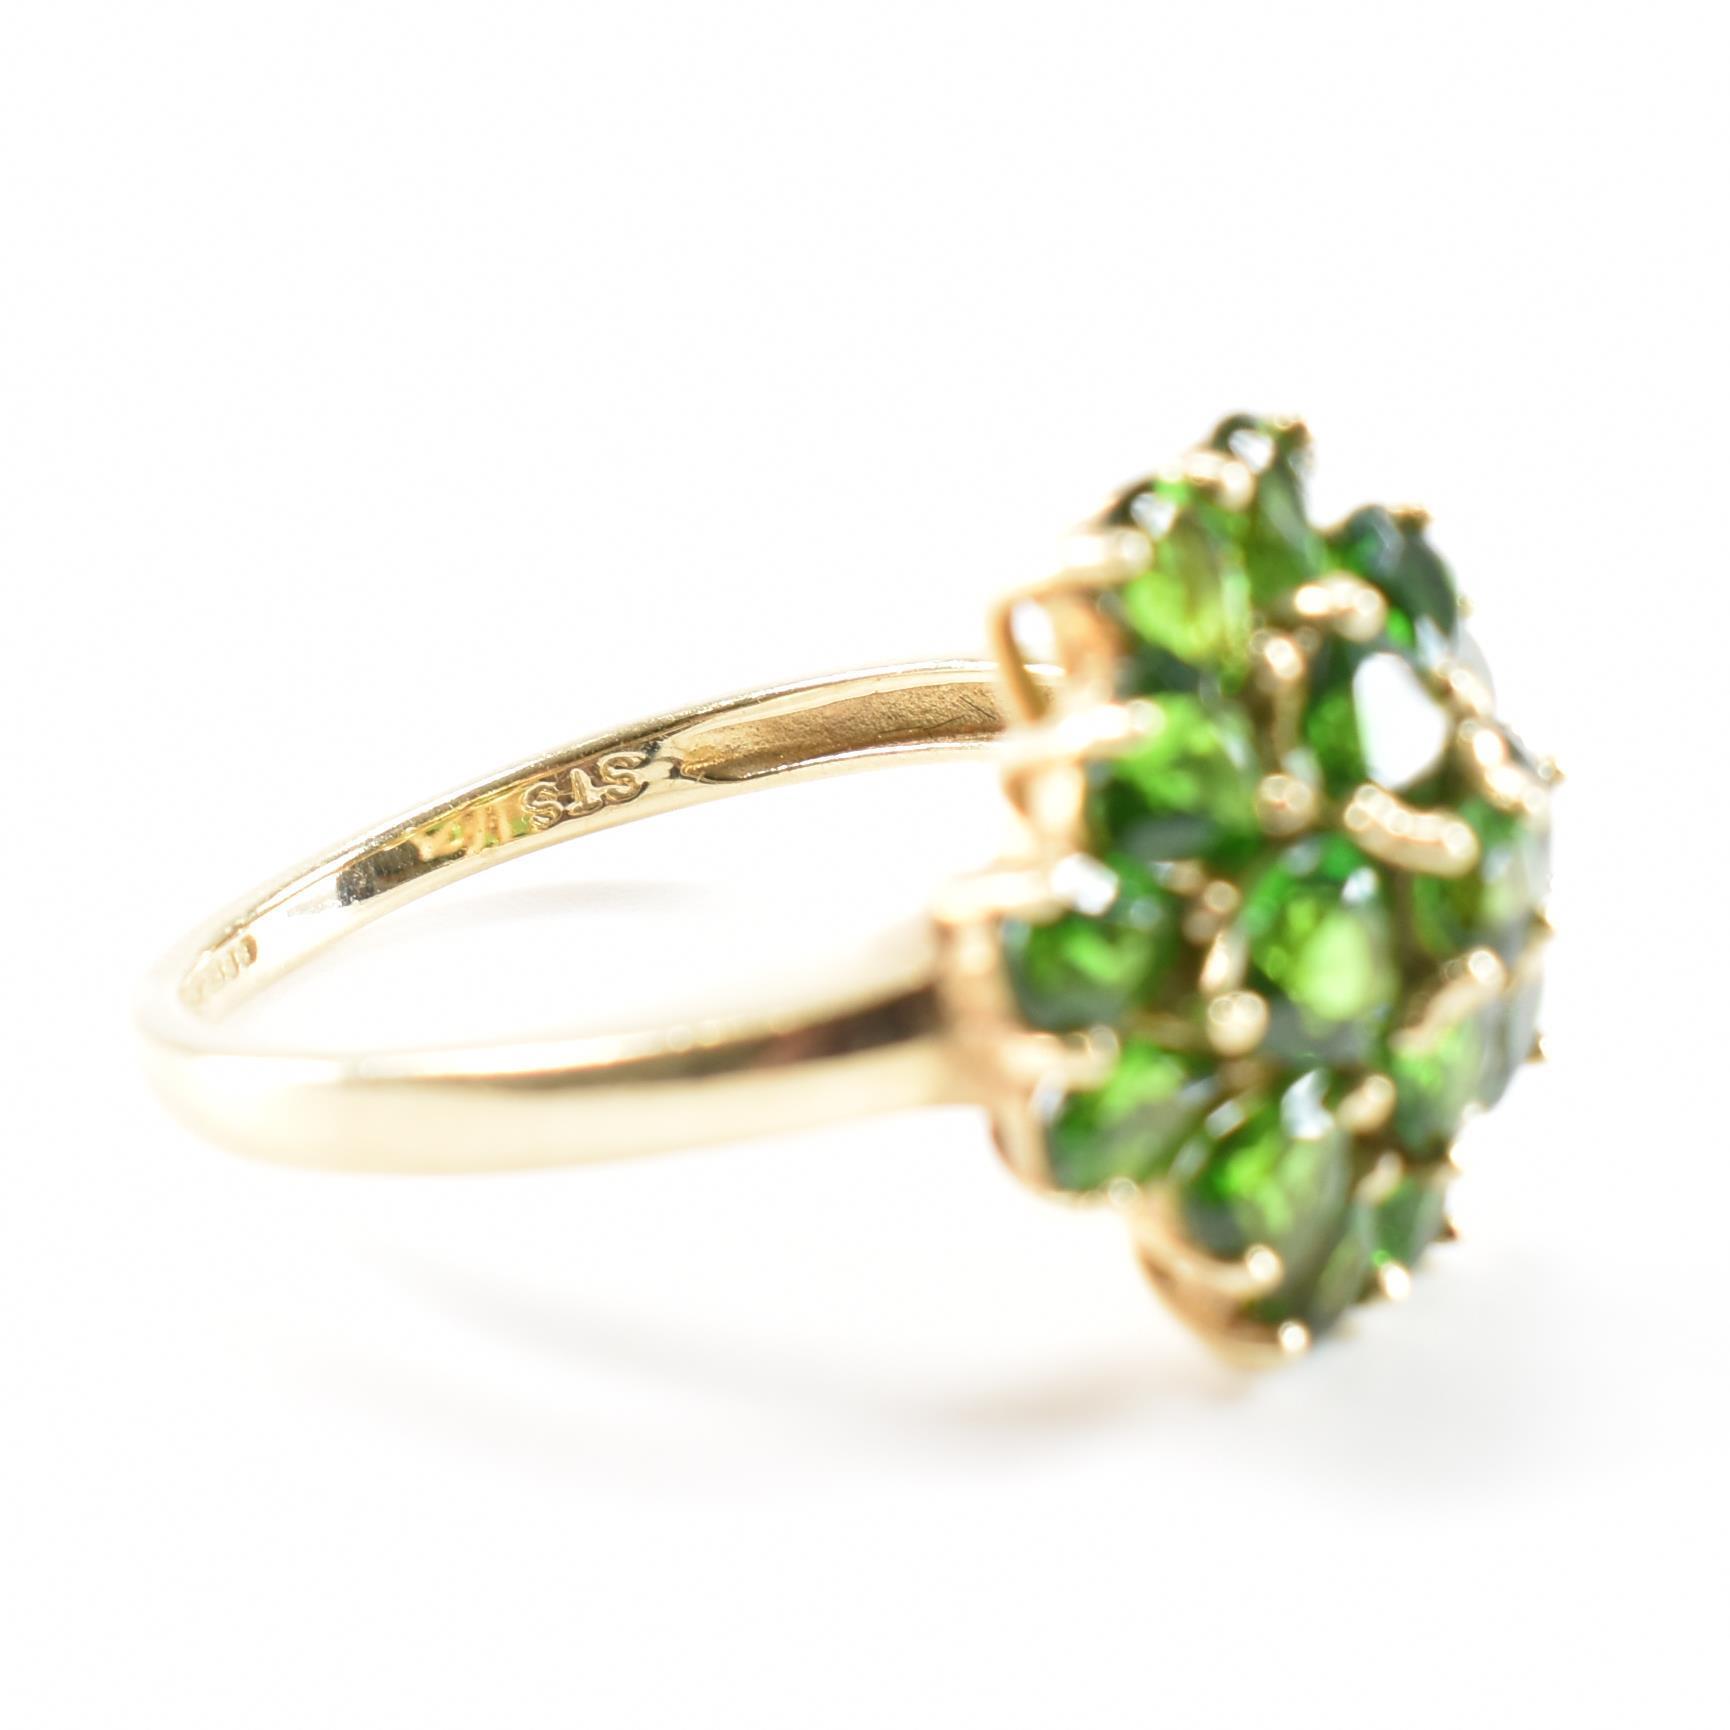 HALLMARKED 9CT GOLD & GREEN STONE CLUSTER RING - Image 8 of 11